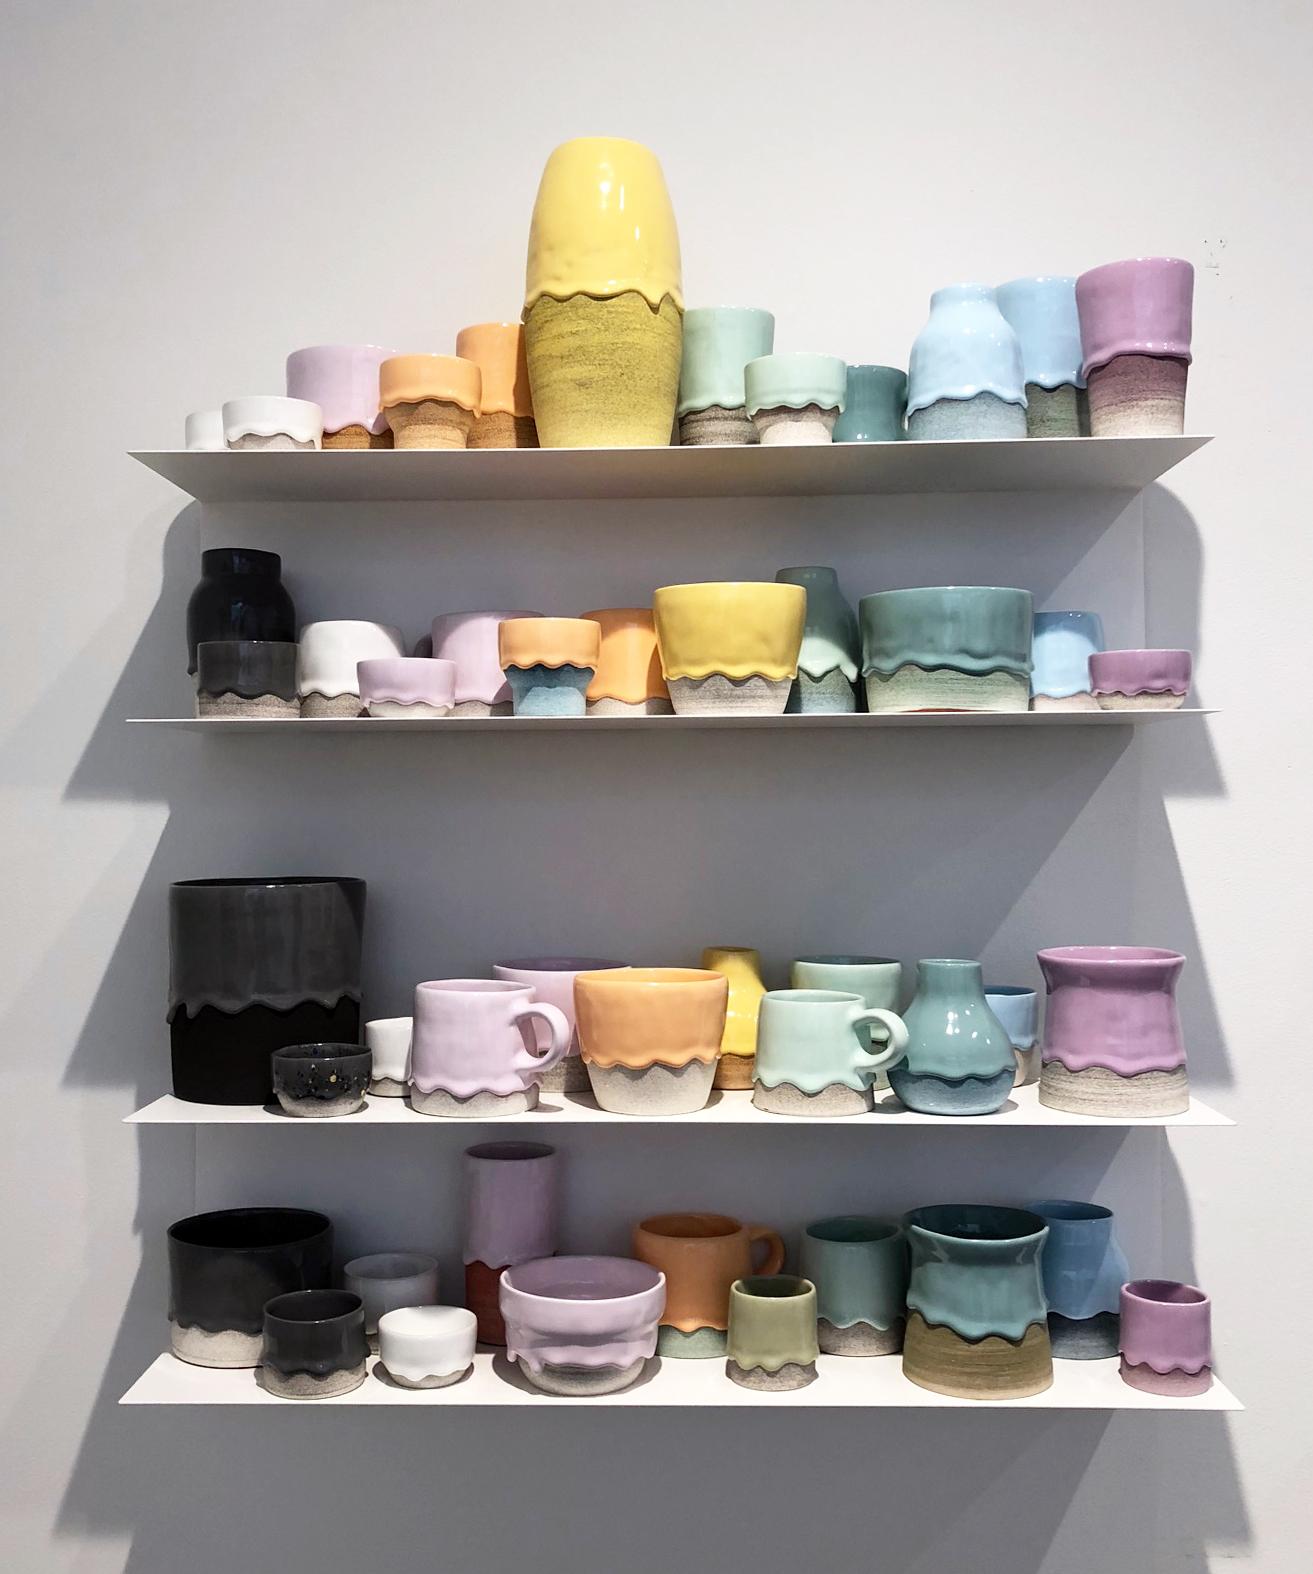 Ceramic Vessel Wall Installation with Shelving, 48 Individual Pieces, Colorful - Contemporary Art by Brian Giniewski